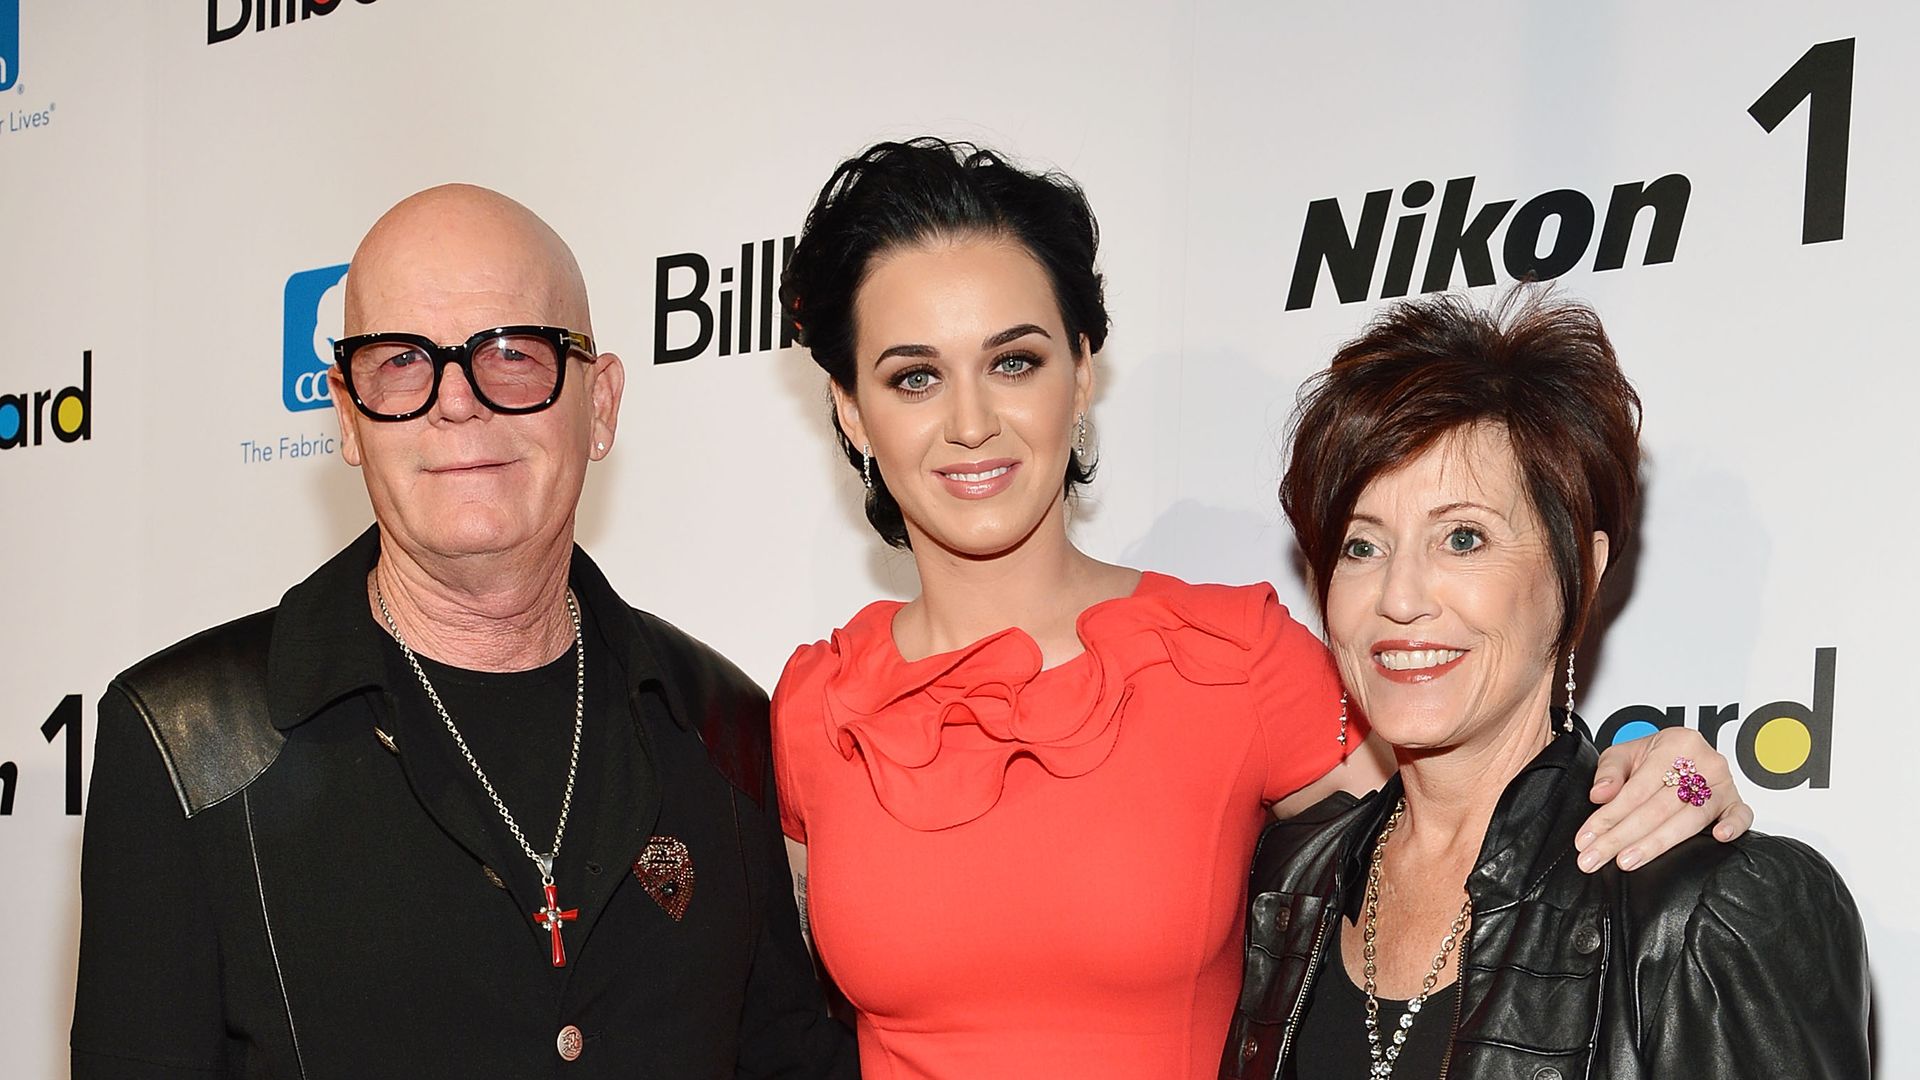 Keith Hudson, singer Katy Perry, and Mary Hudson attend the 2012 Billboard Women In Music Luncheon at Capitale on November 30, 2012 in New York City